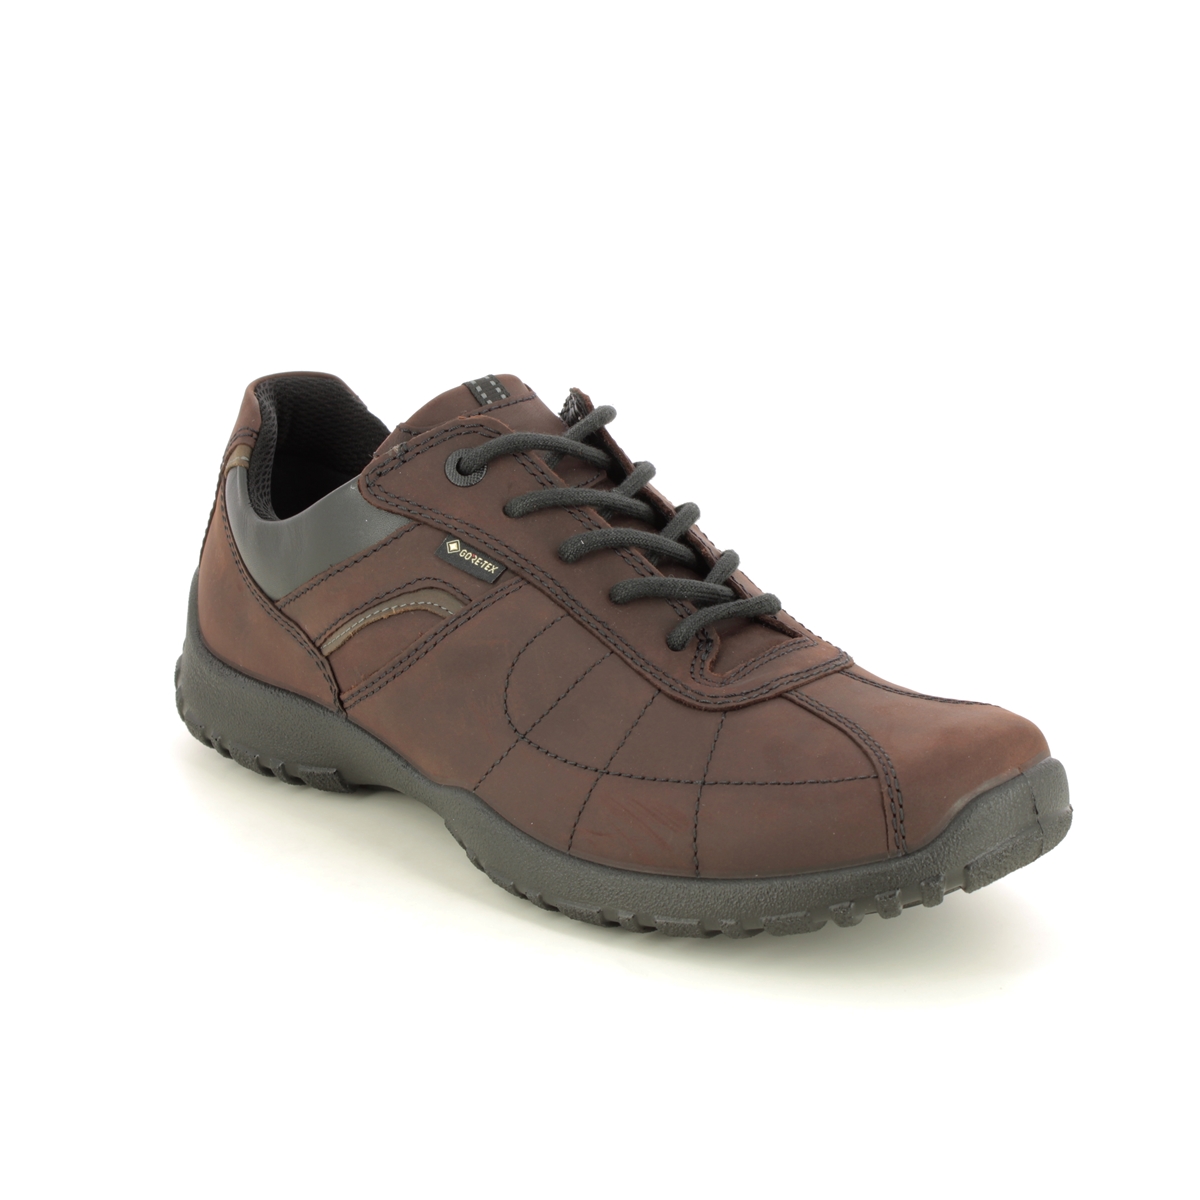 Hotter Thor 2 Gtx Brown leather Mens comfort shoes 3321-21